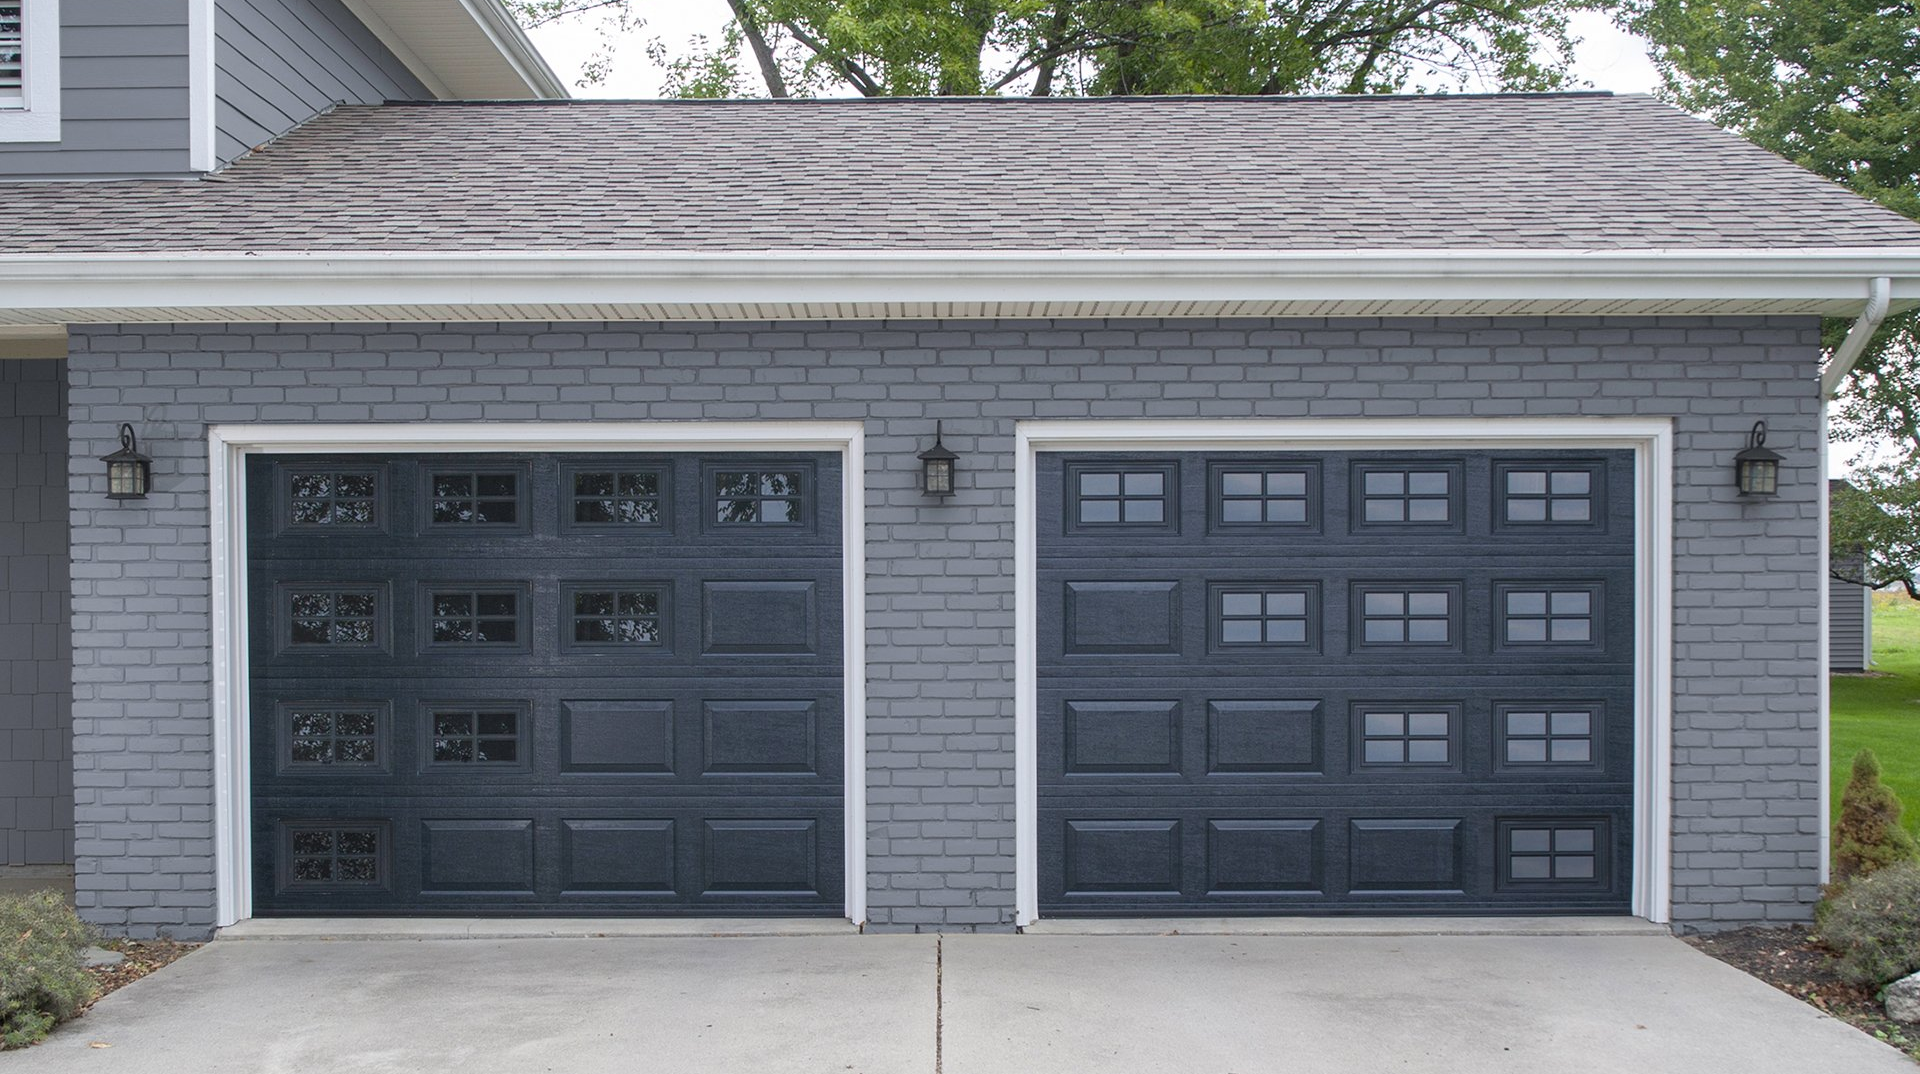 Glass Where You Want It, Haas 680 Garage Door Reviews